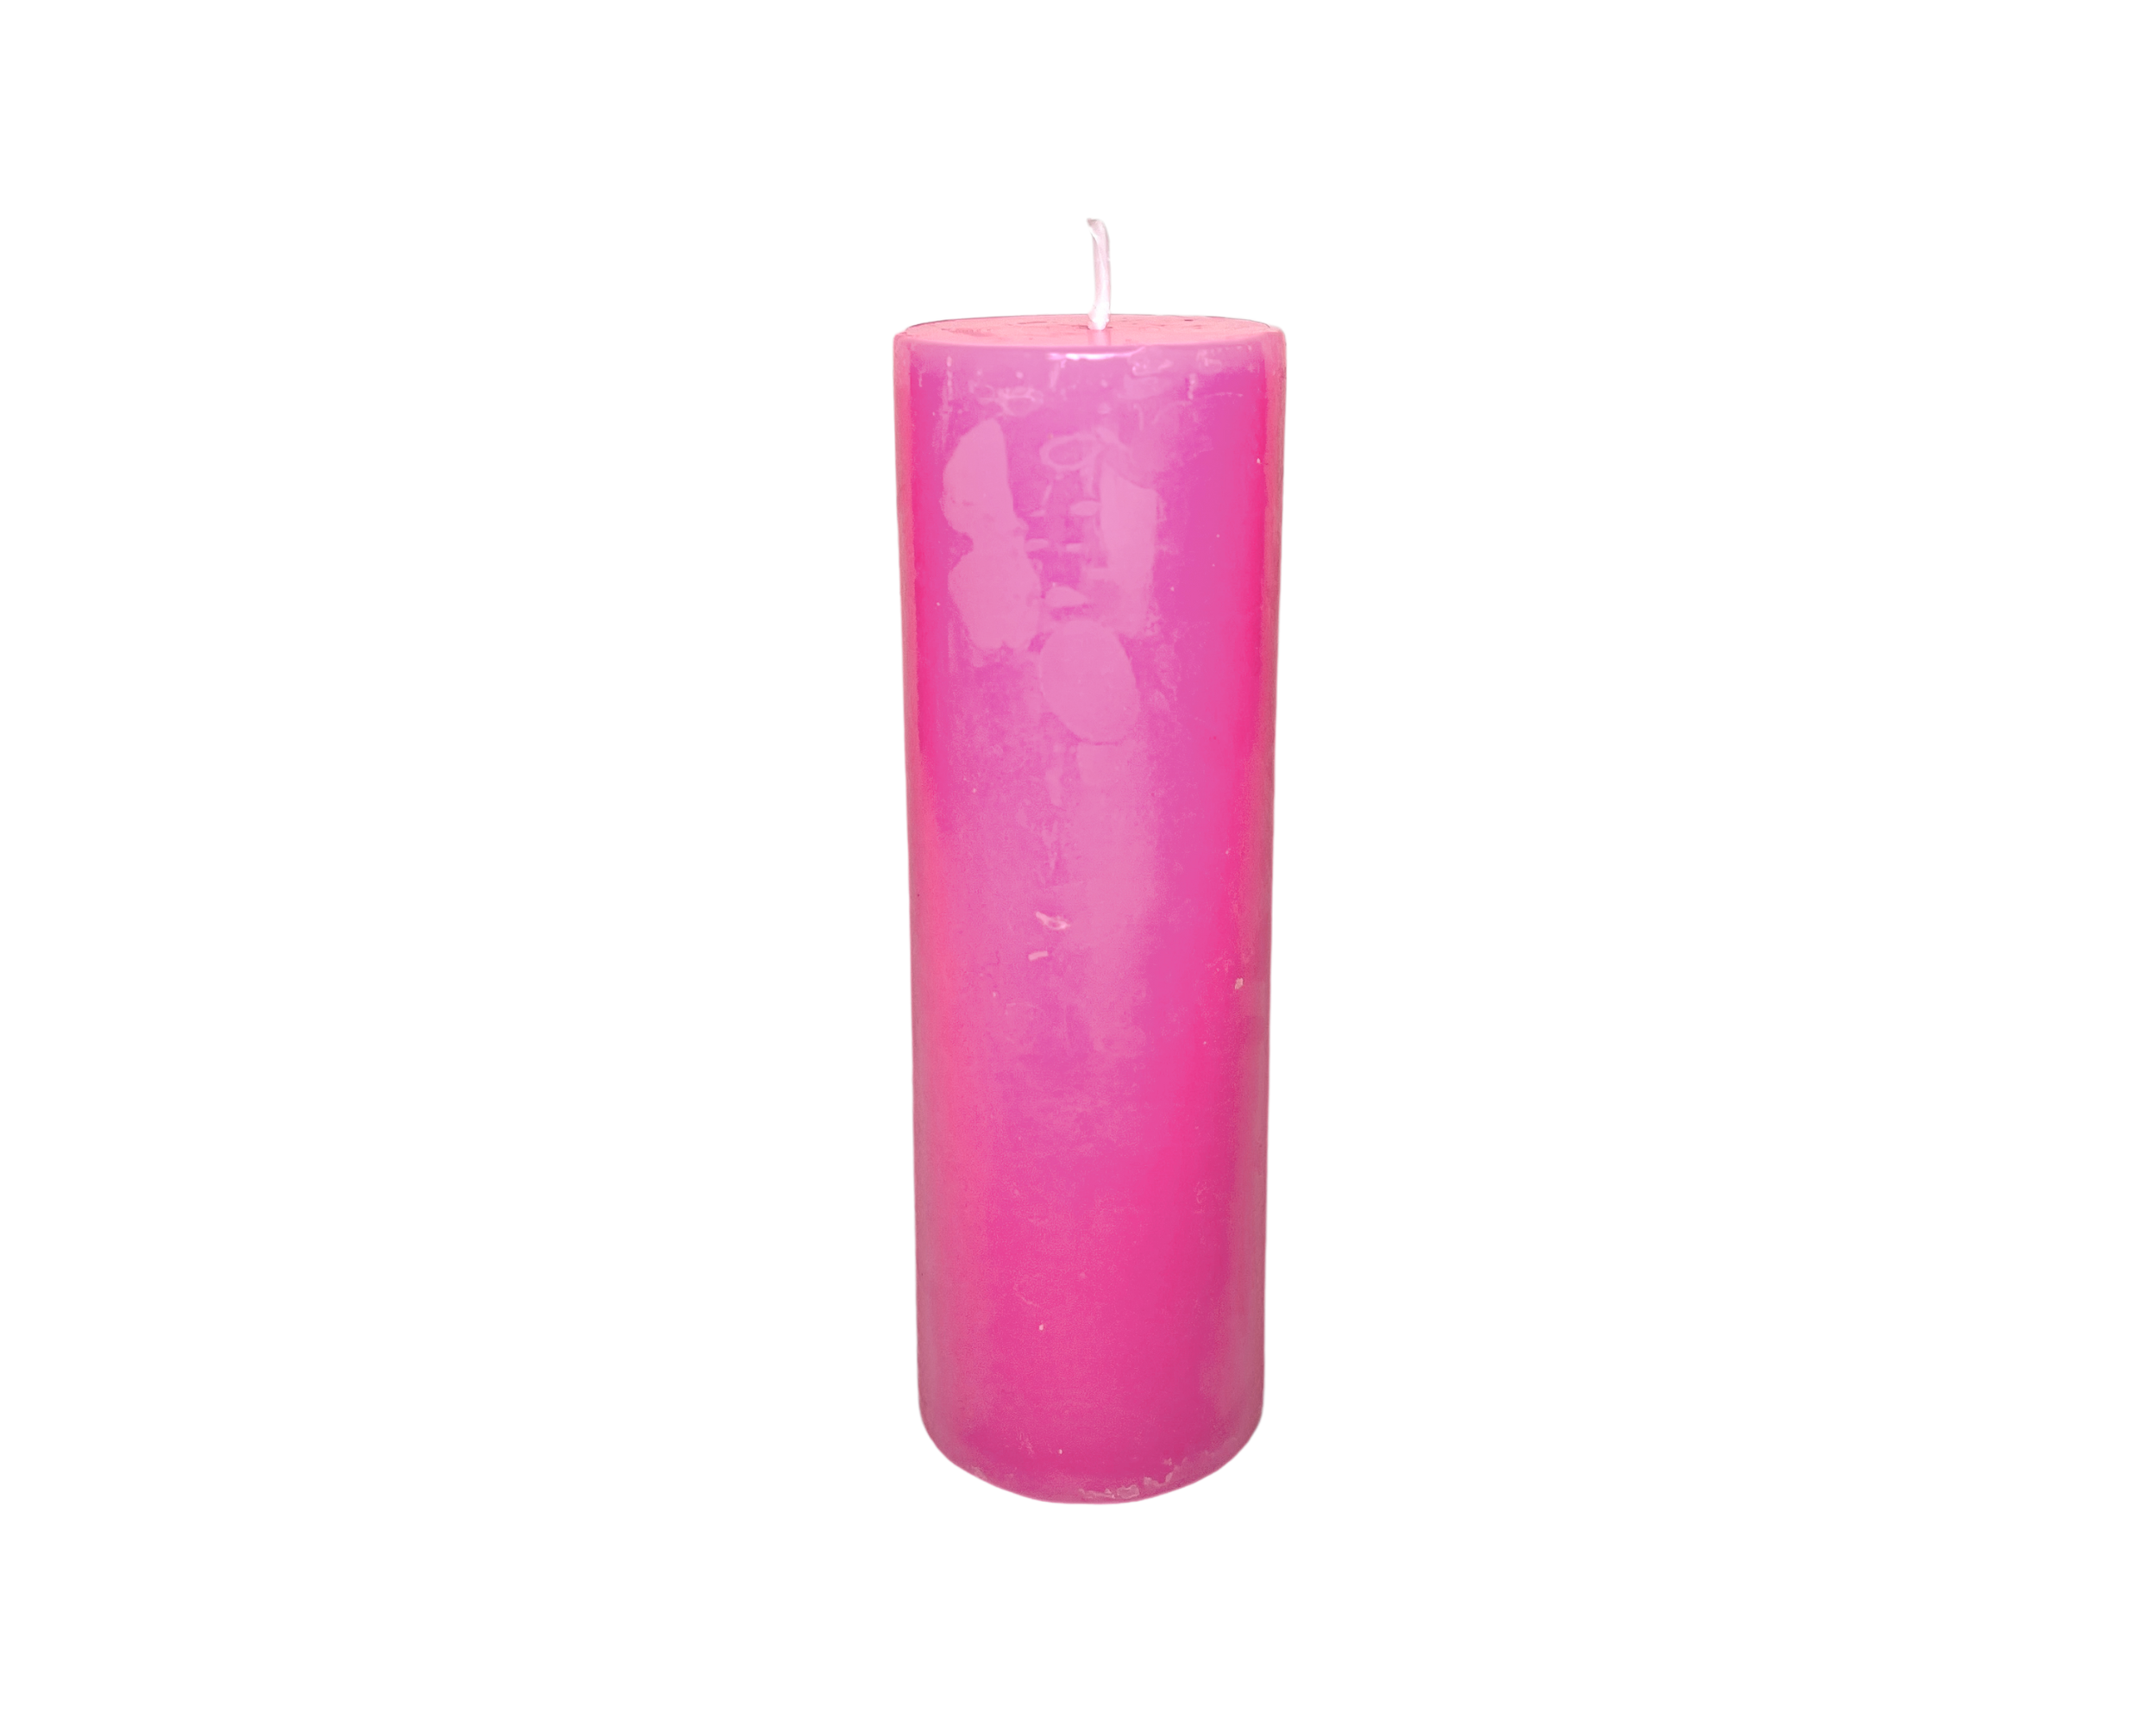 Buy Online Latest and Unique Pink Pillar Candle 2" x 6" inches - Love, Compassion, Self-Love, Romance | Shop Best Spiritual Items - The Mystical Ritual